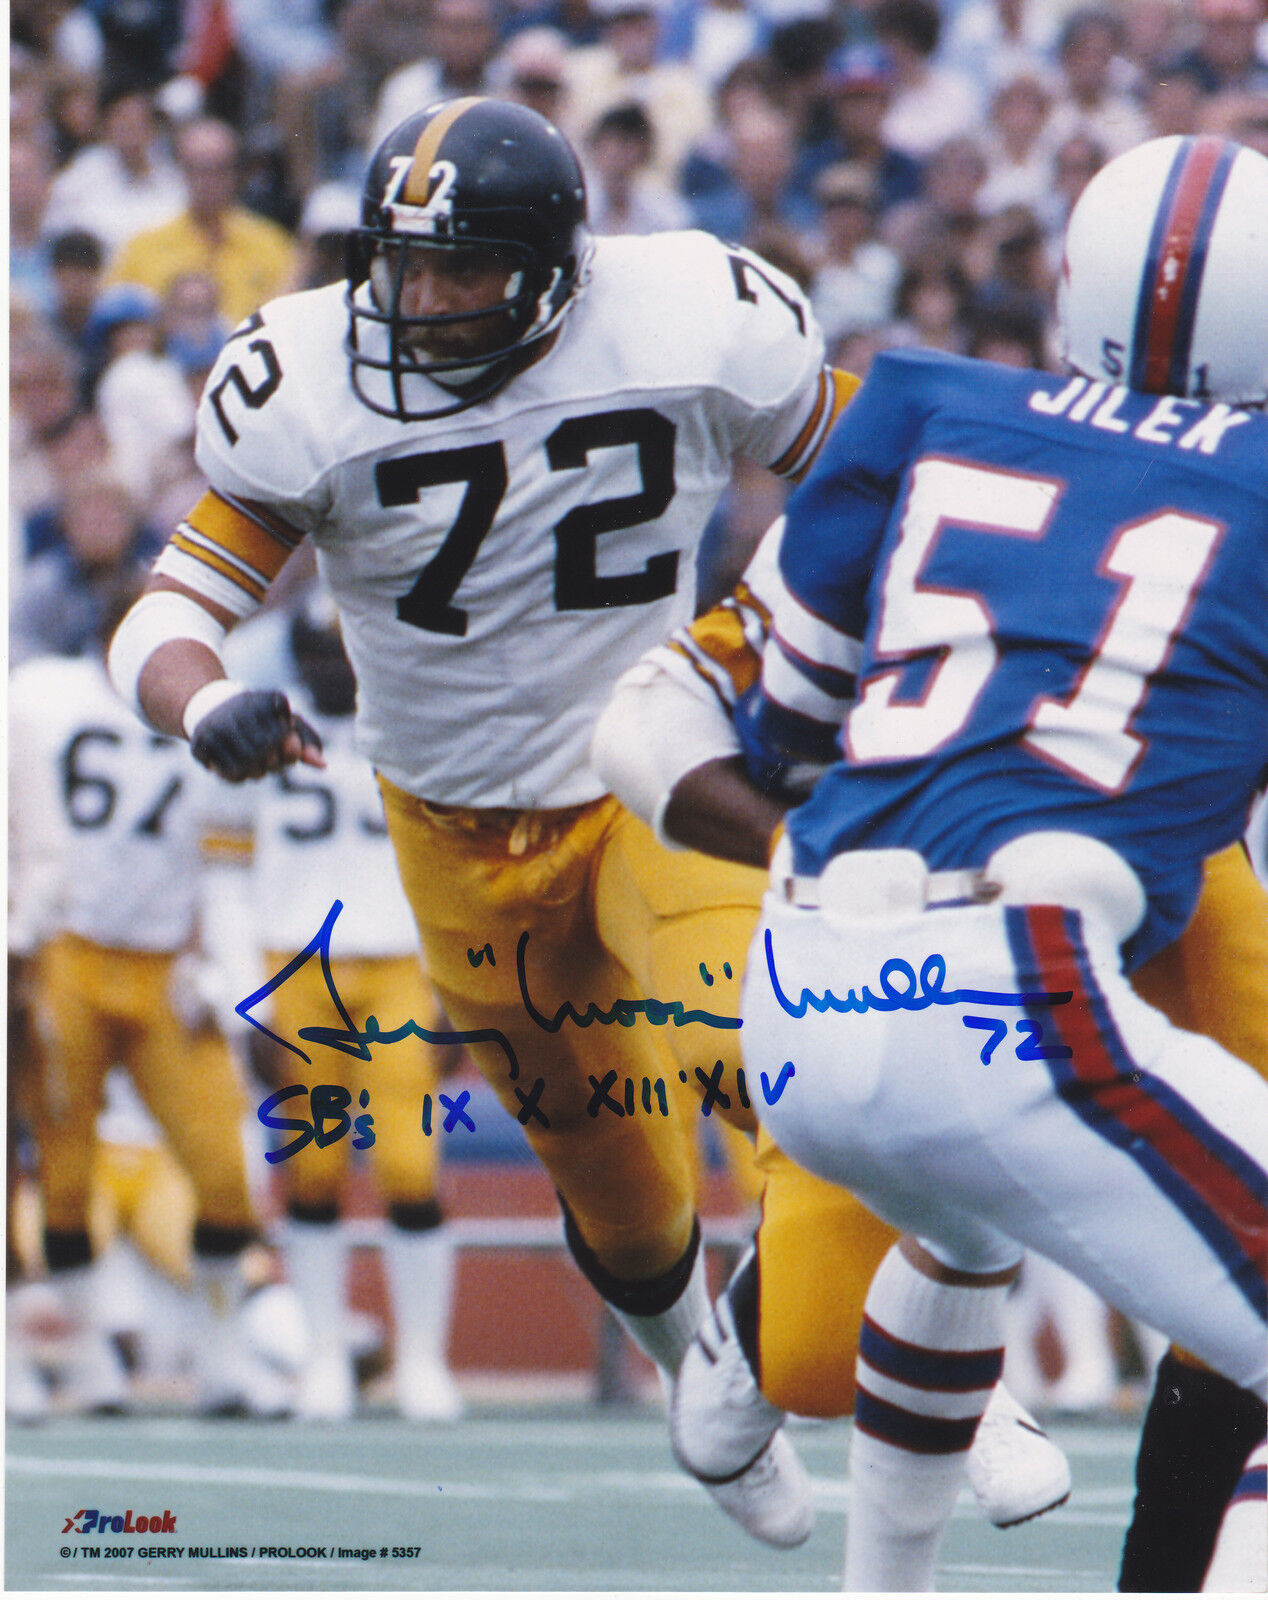 GERRY MULLINS PITTSBURGH STEELERS SB IX, X, XIIIX, XIV ACTION SIGNED 8x10